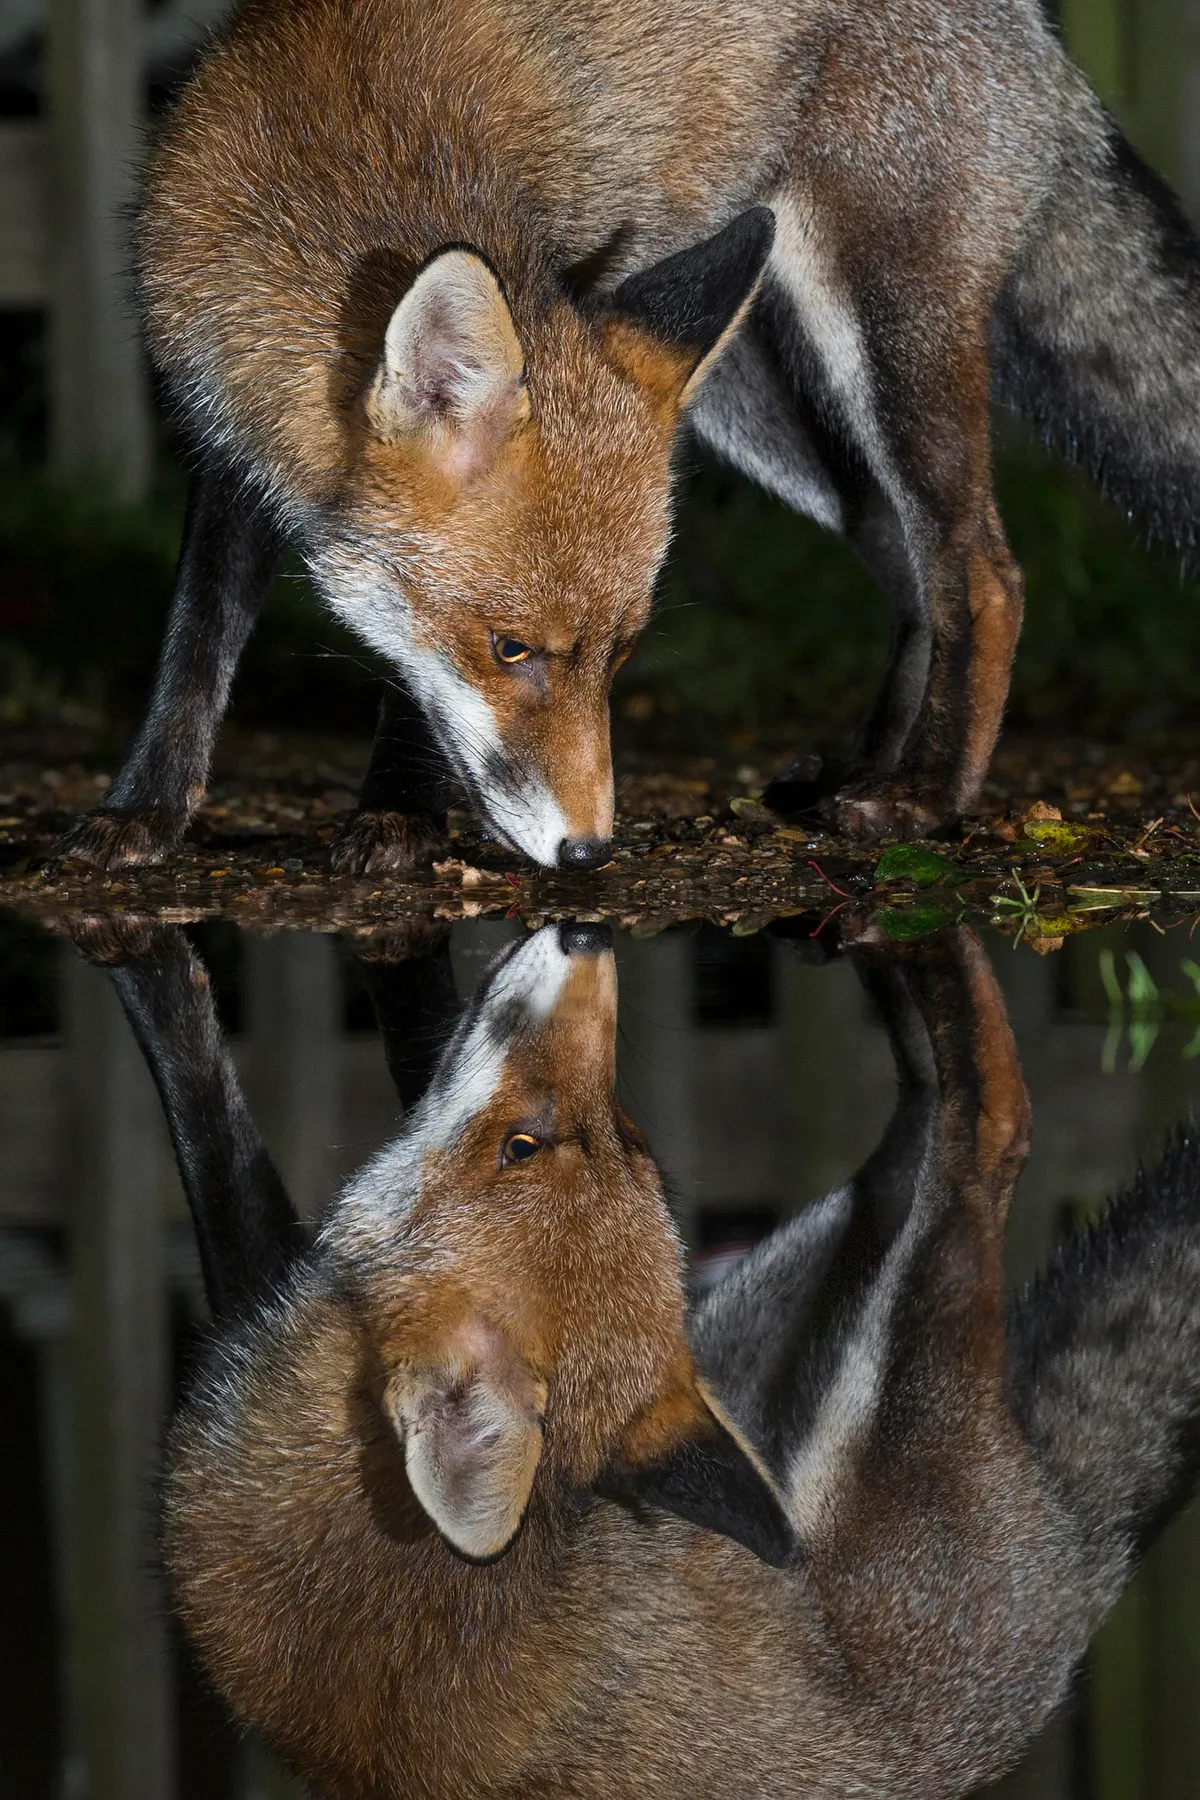 Young Mammal Photographer of the Year, aged 16-18 Category Highly Commended: Mirrored fox. © Kyle Moore.